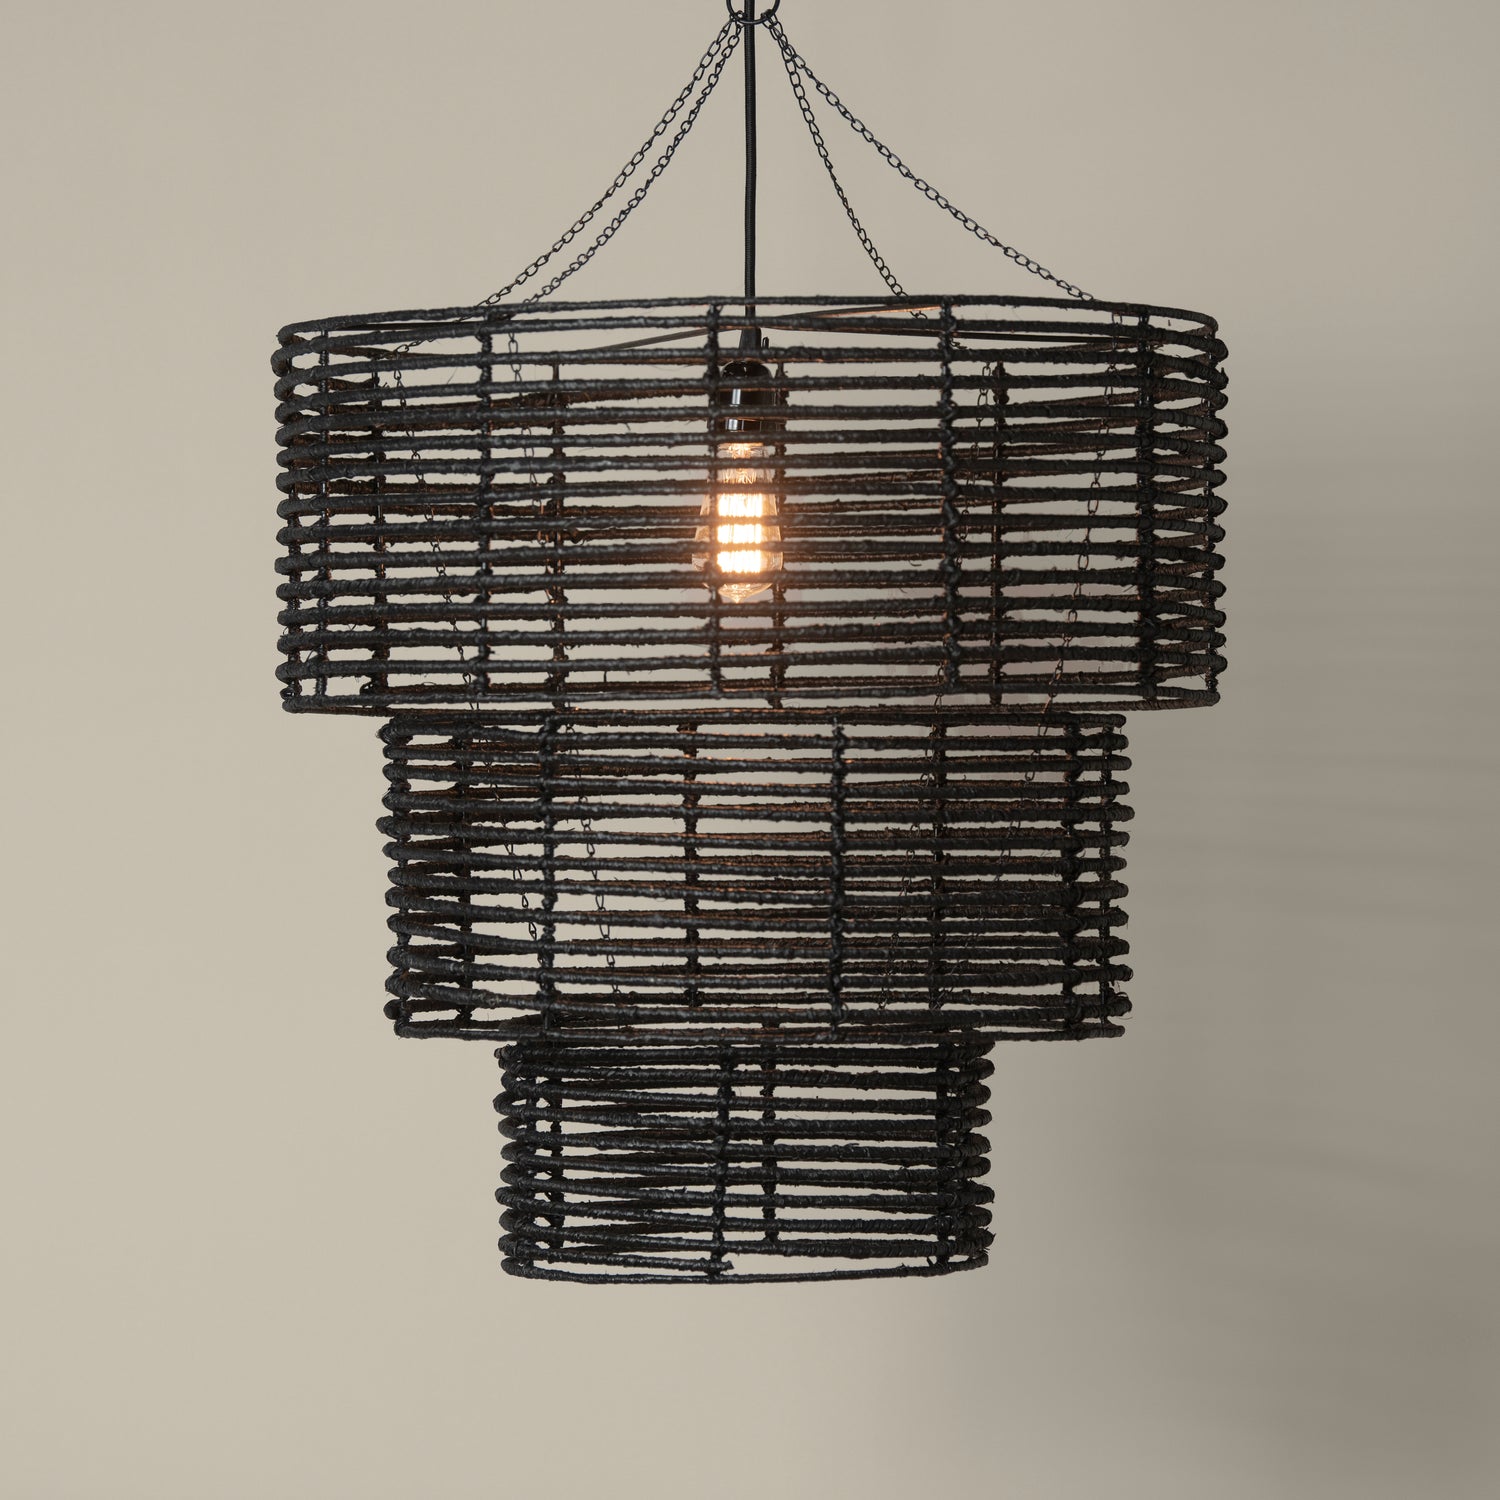 3 tier chandelier in black with light on